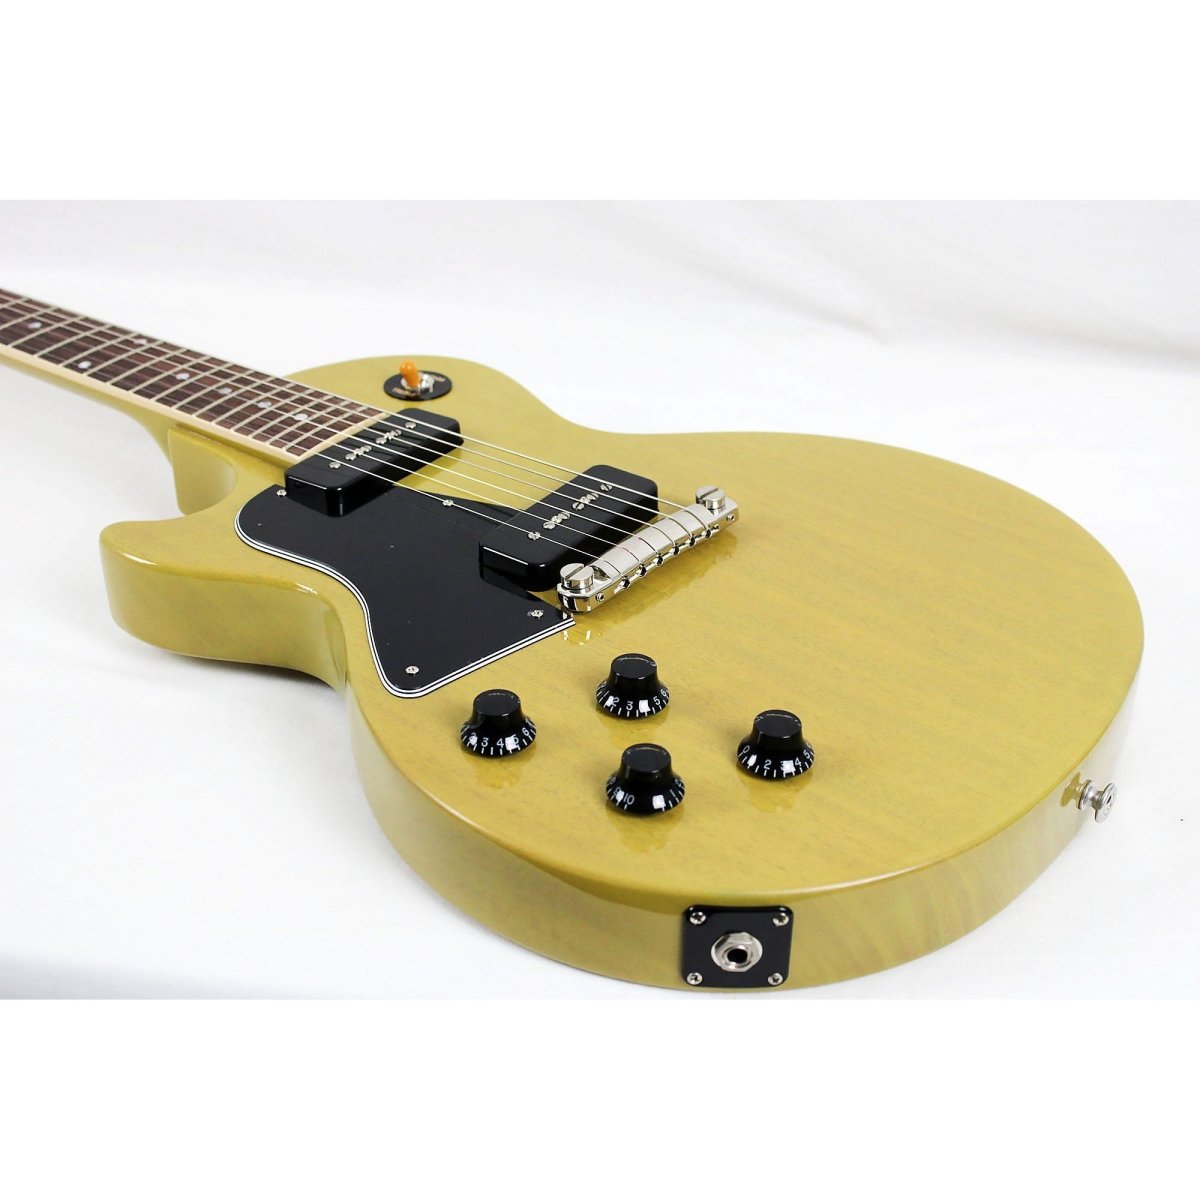 Gibson Les Paul Special Left-handed - TV Yellow **USED - MINT** - Leitz Music--203840200